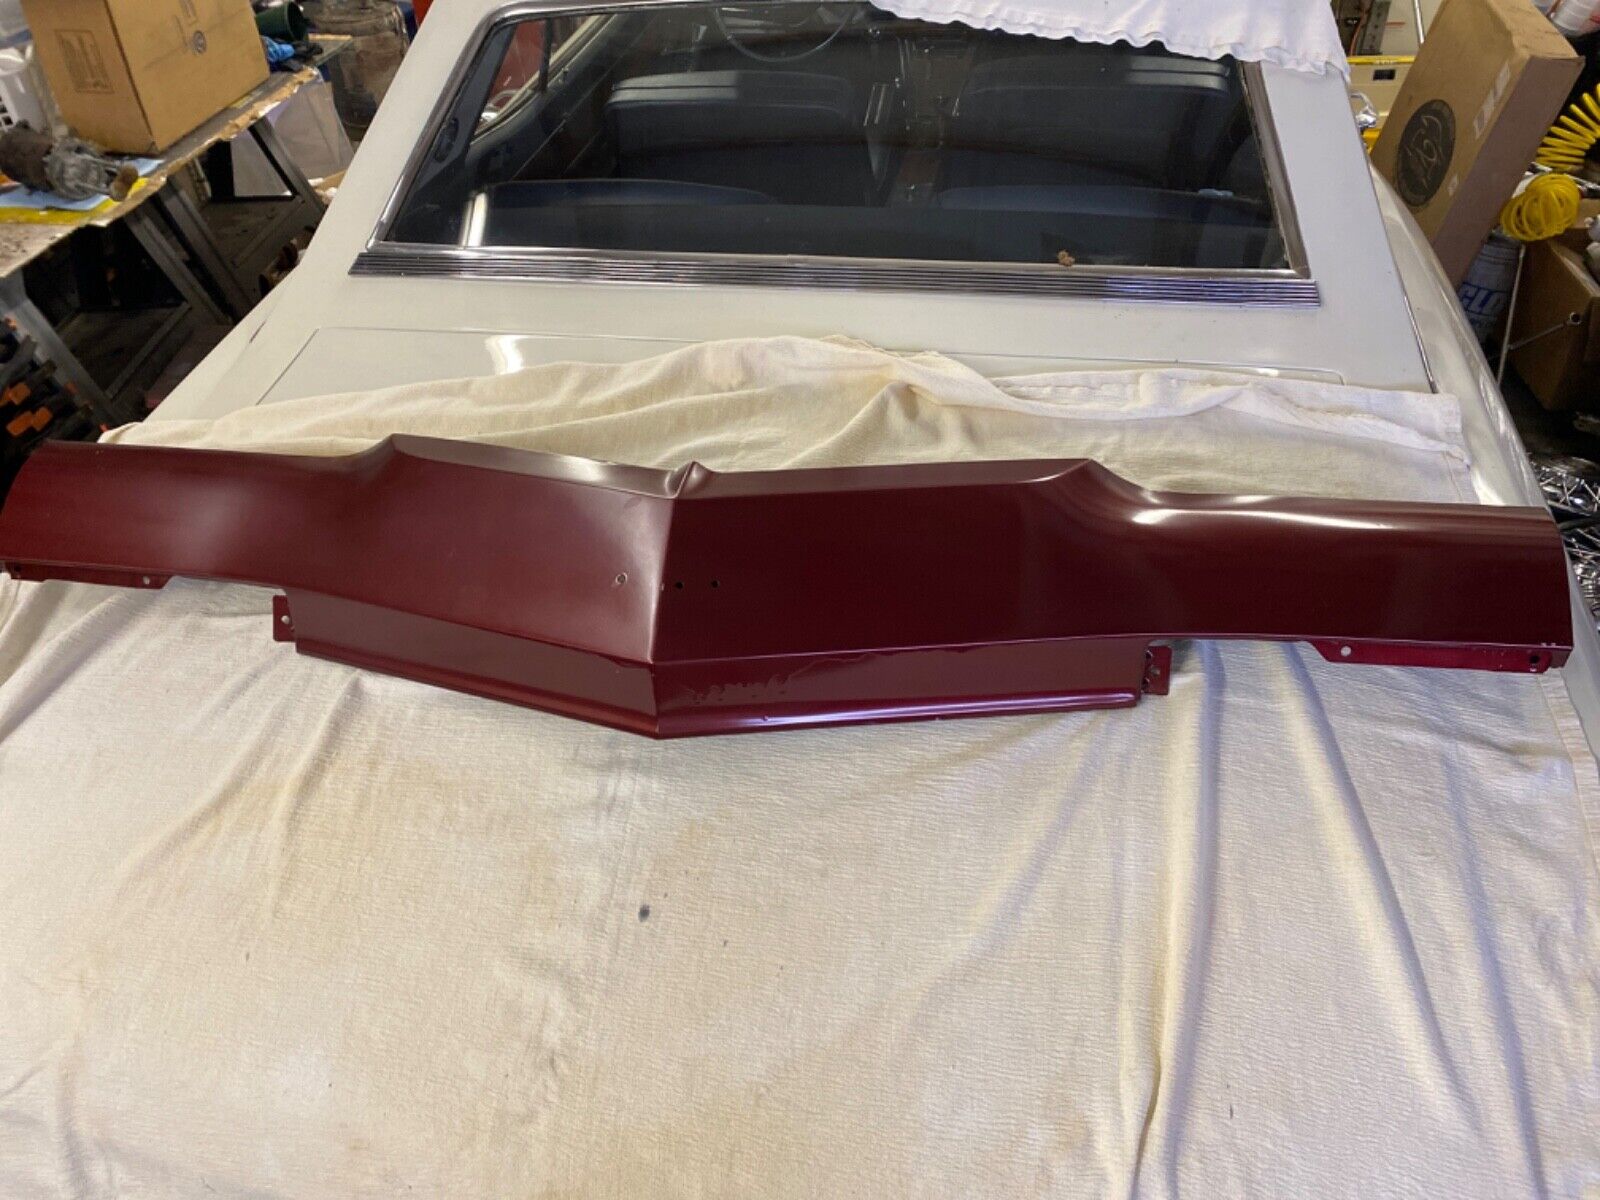 1973 Buick Riviera GS header panel straight painted an original popular color